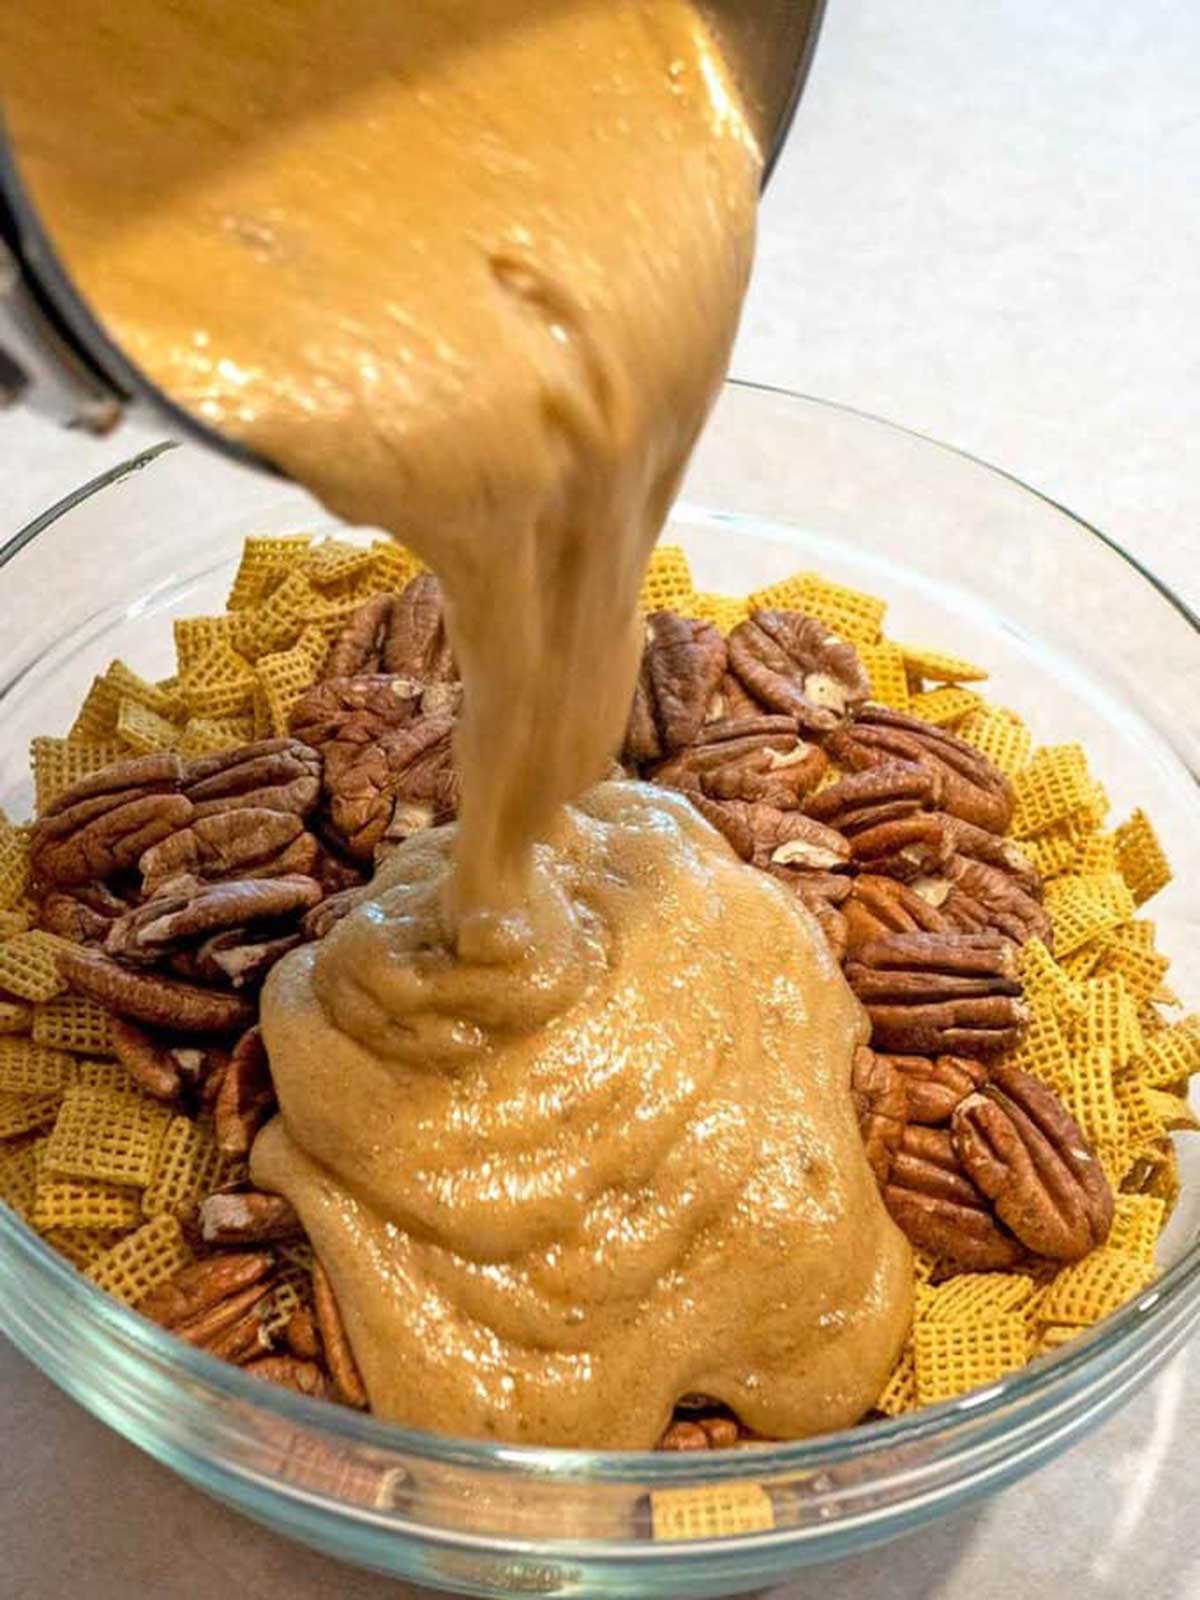 Pouring caramel on Corn Chex and pecans.